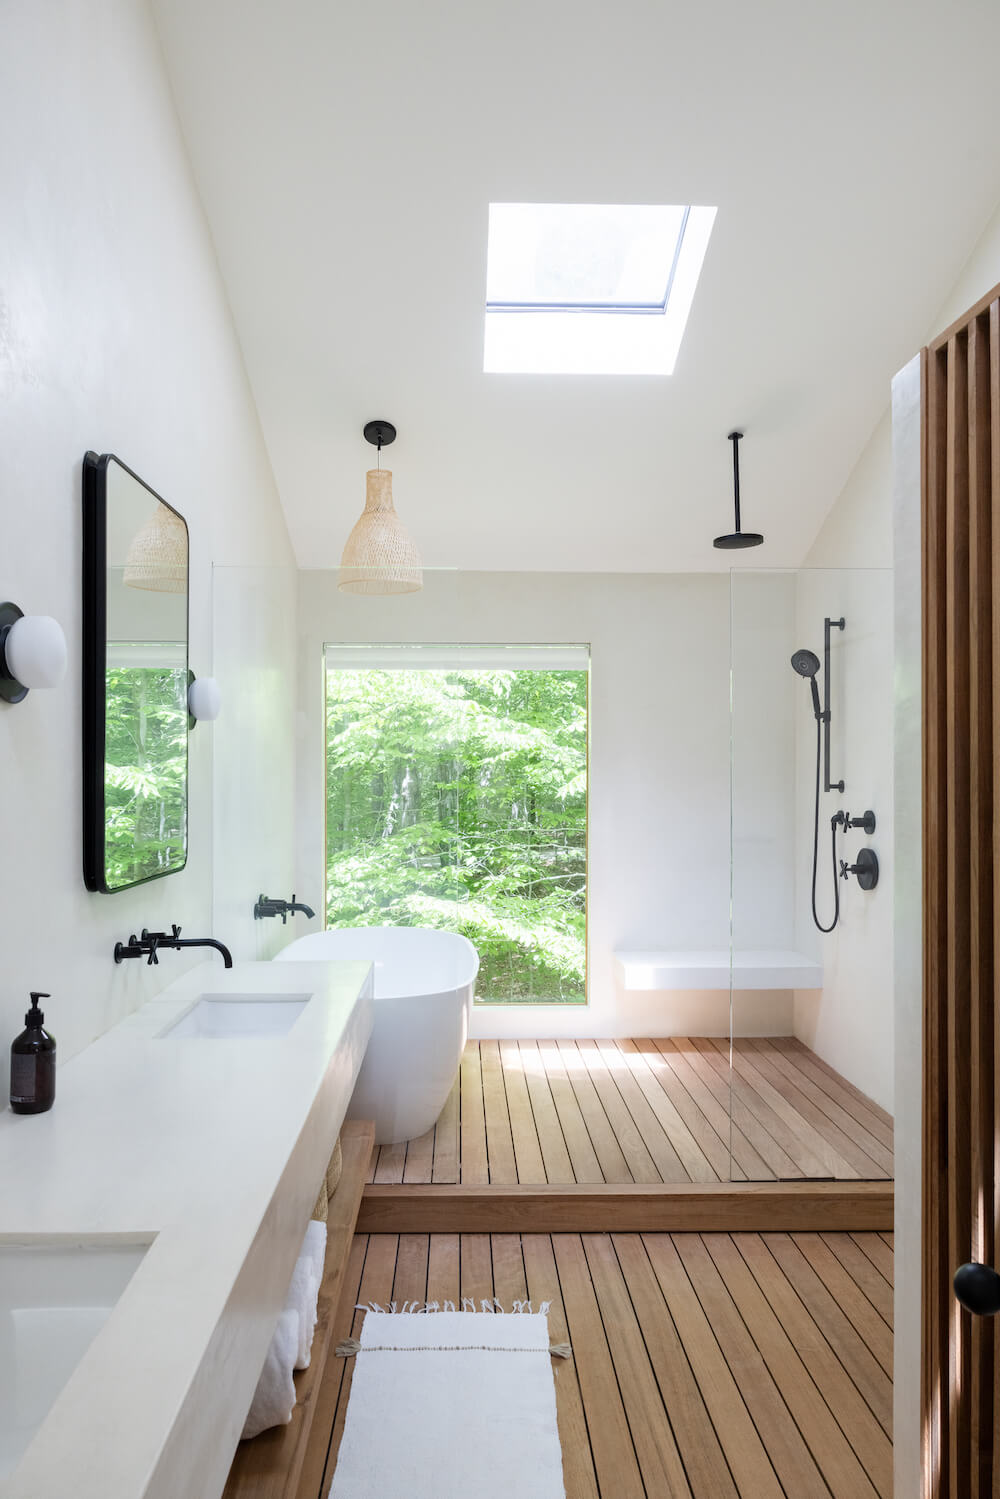 Master bath with wooden floors and white tub